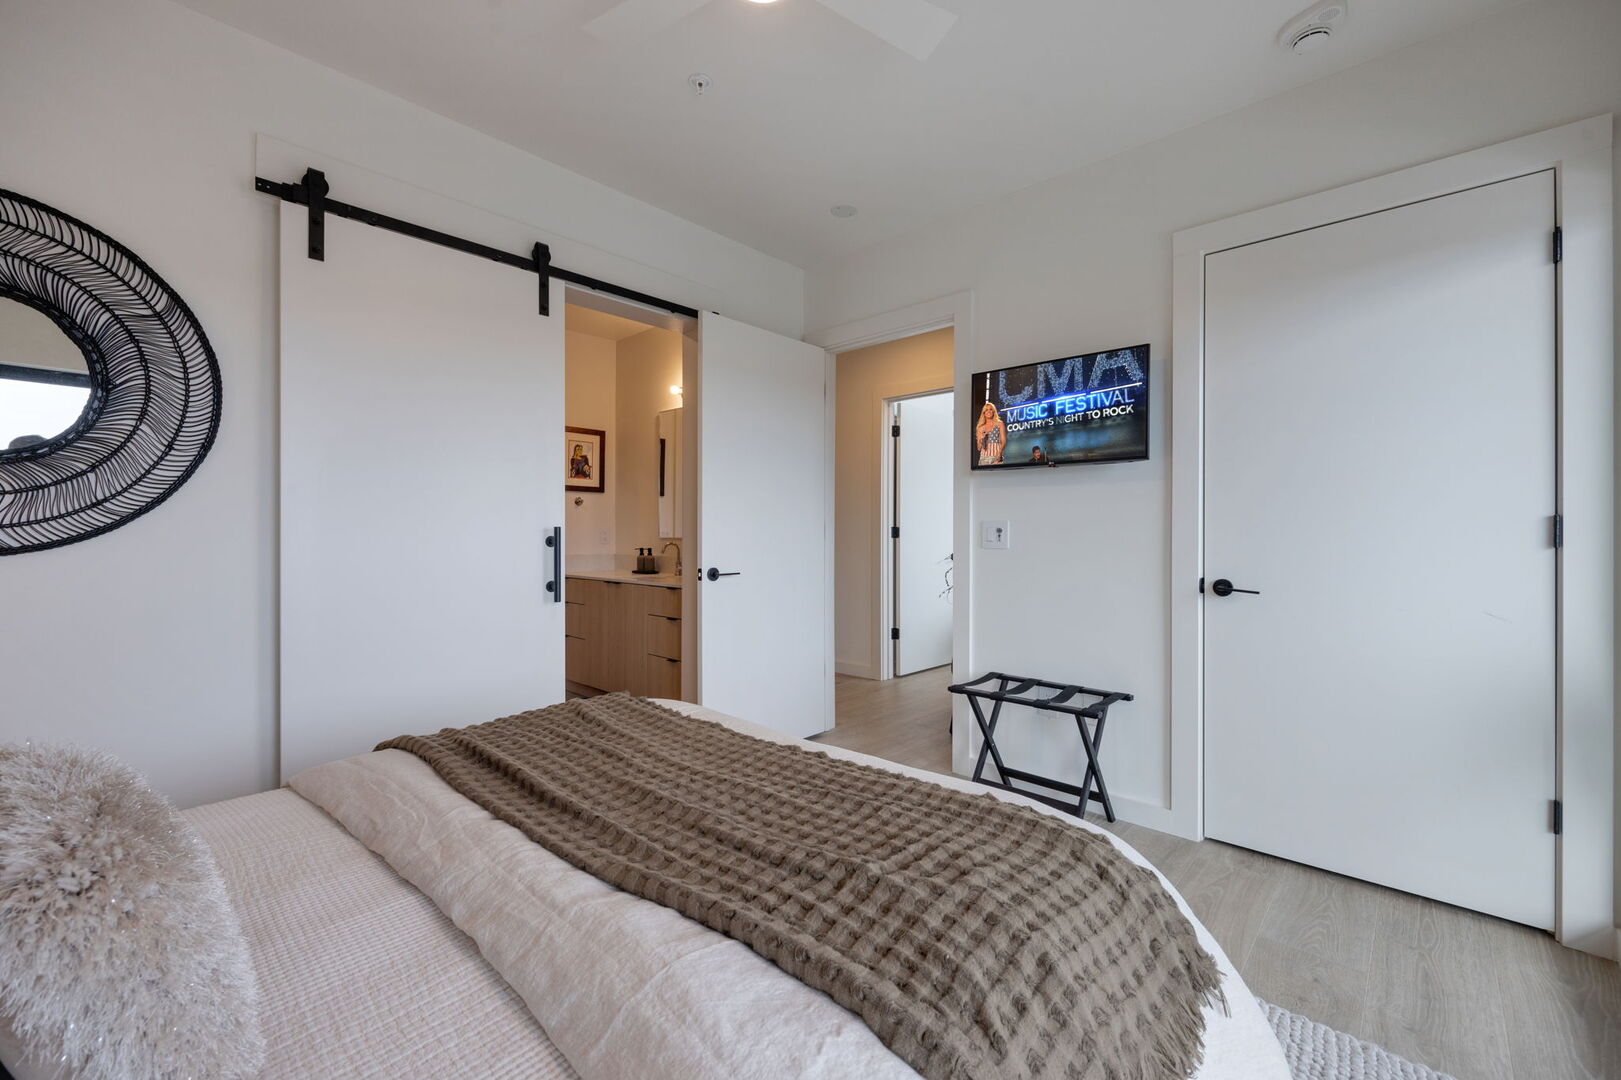 Main Level: 2nd bedroom with Queen bed, smart TV, connected to the 2nd bathroom (jack-and-jill style).